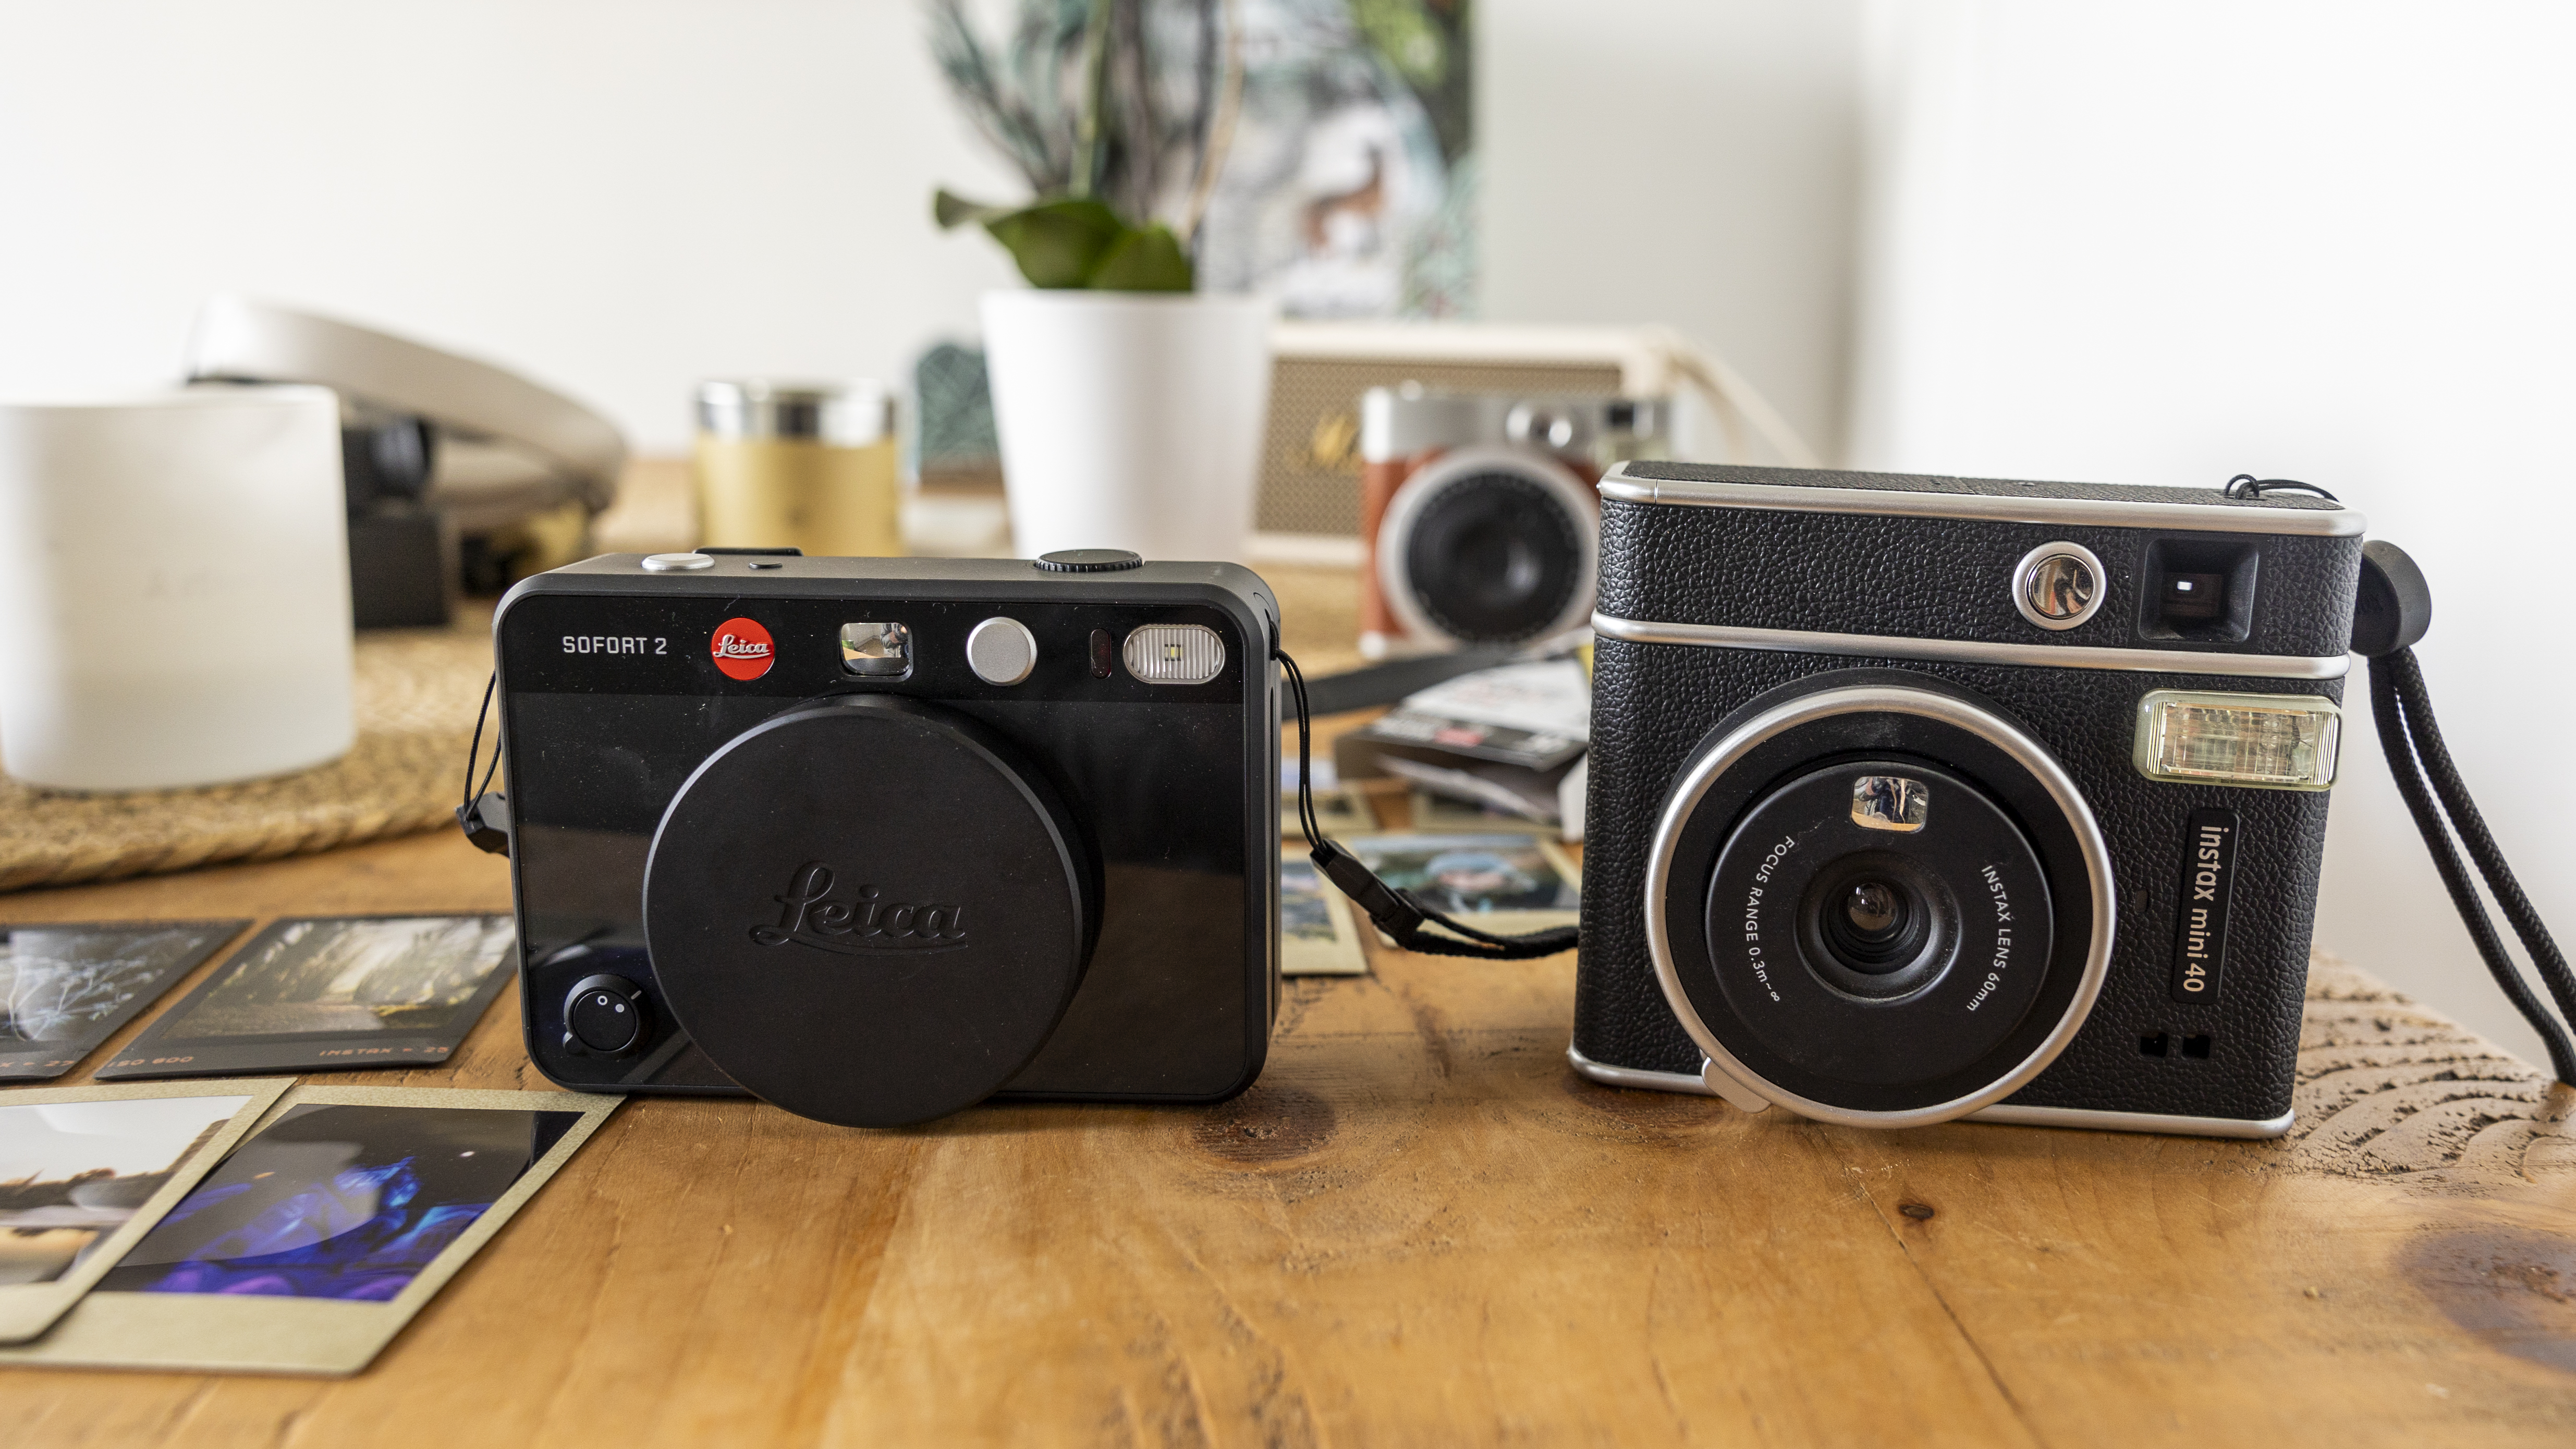 The Leica Sofort 2 on a wooden table next to the Instax Mini 90